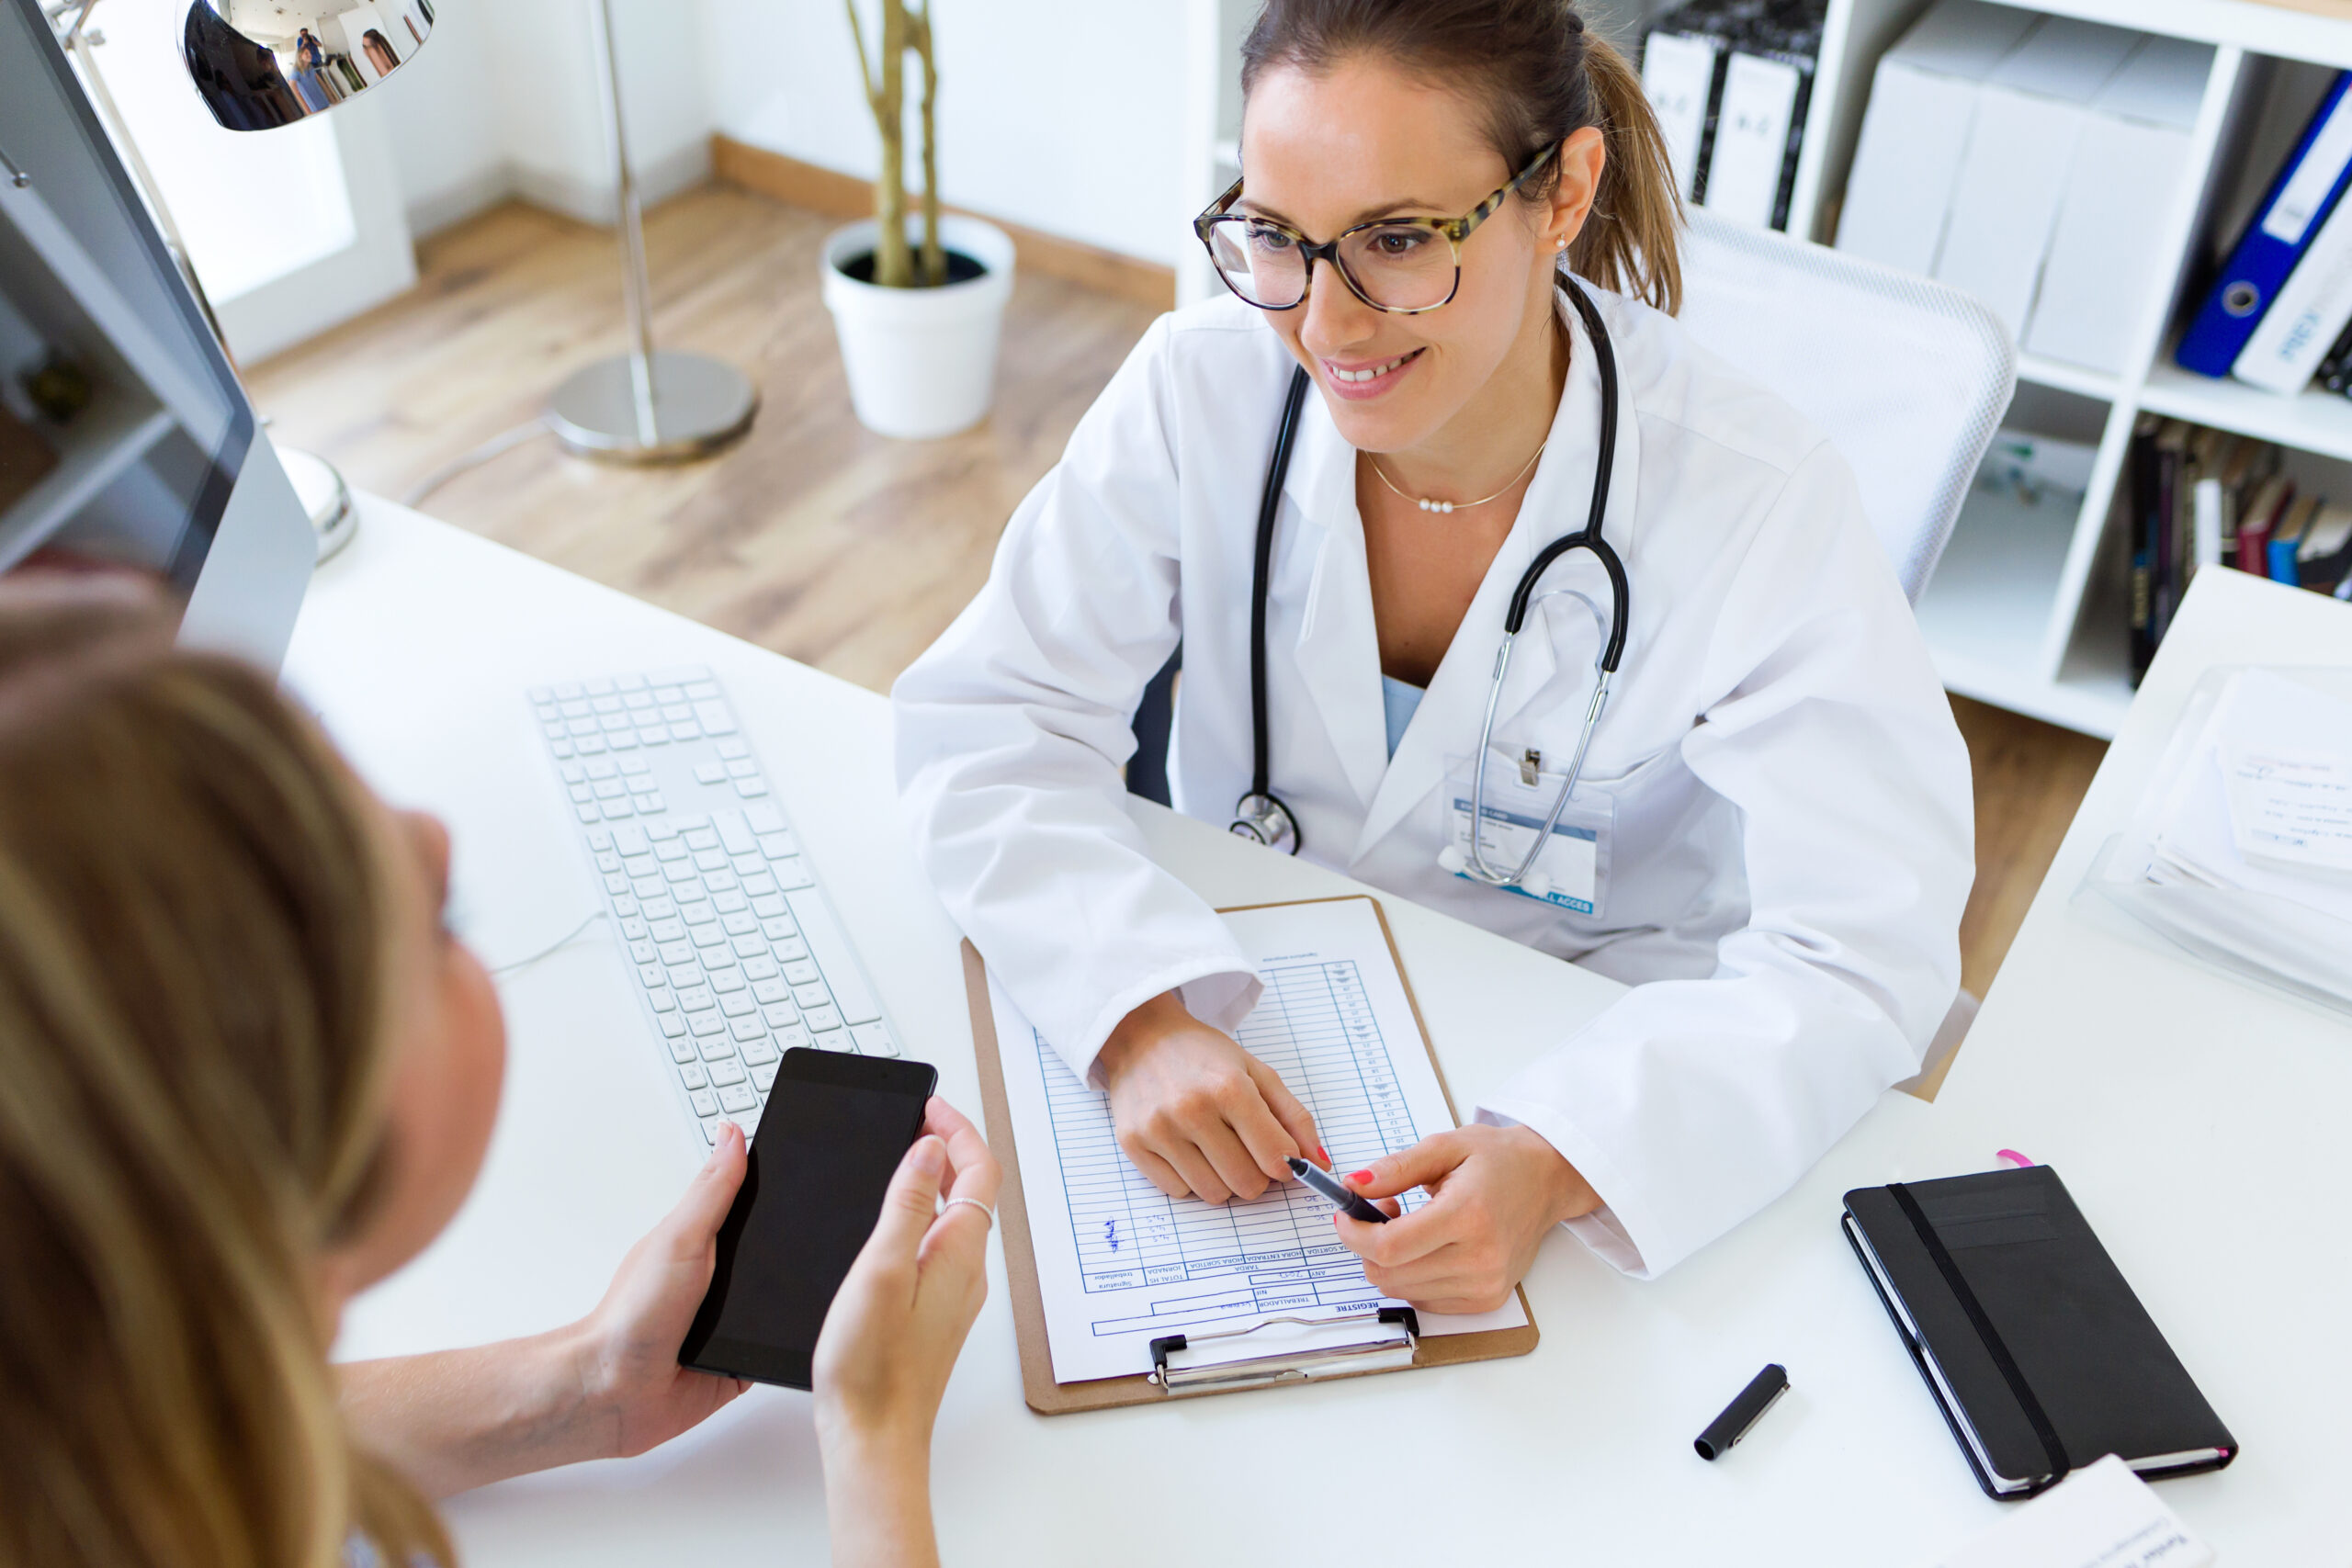 The Importance of Sharing Information with Your Doctor